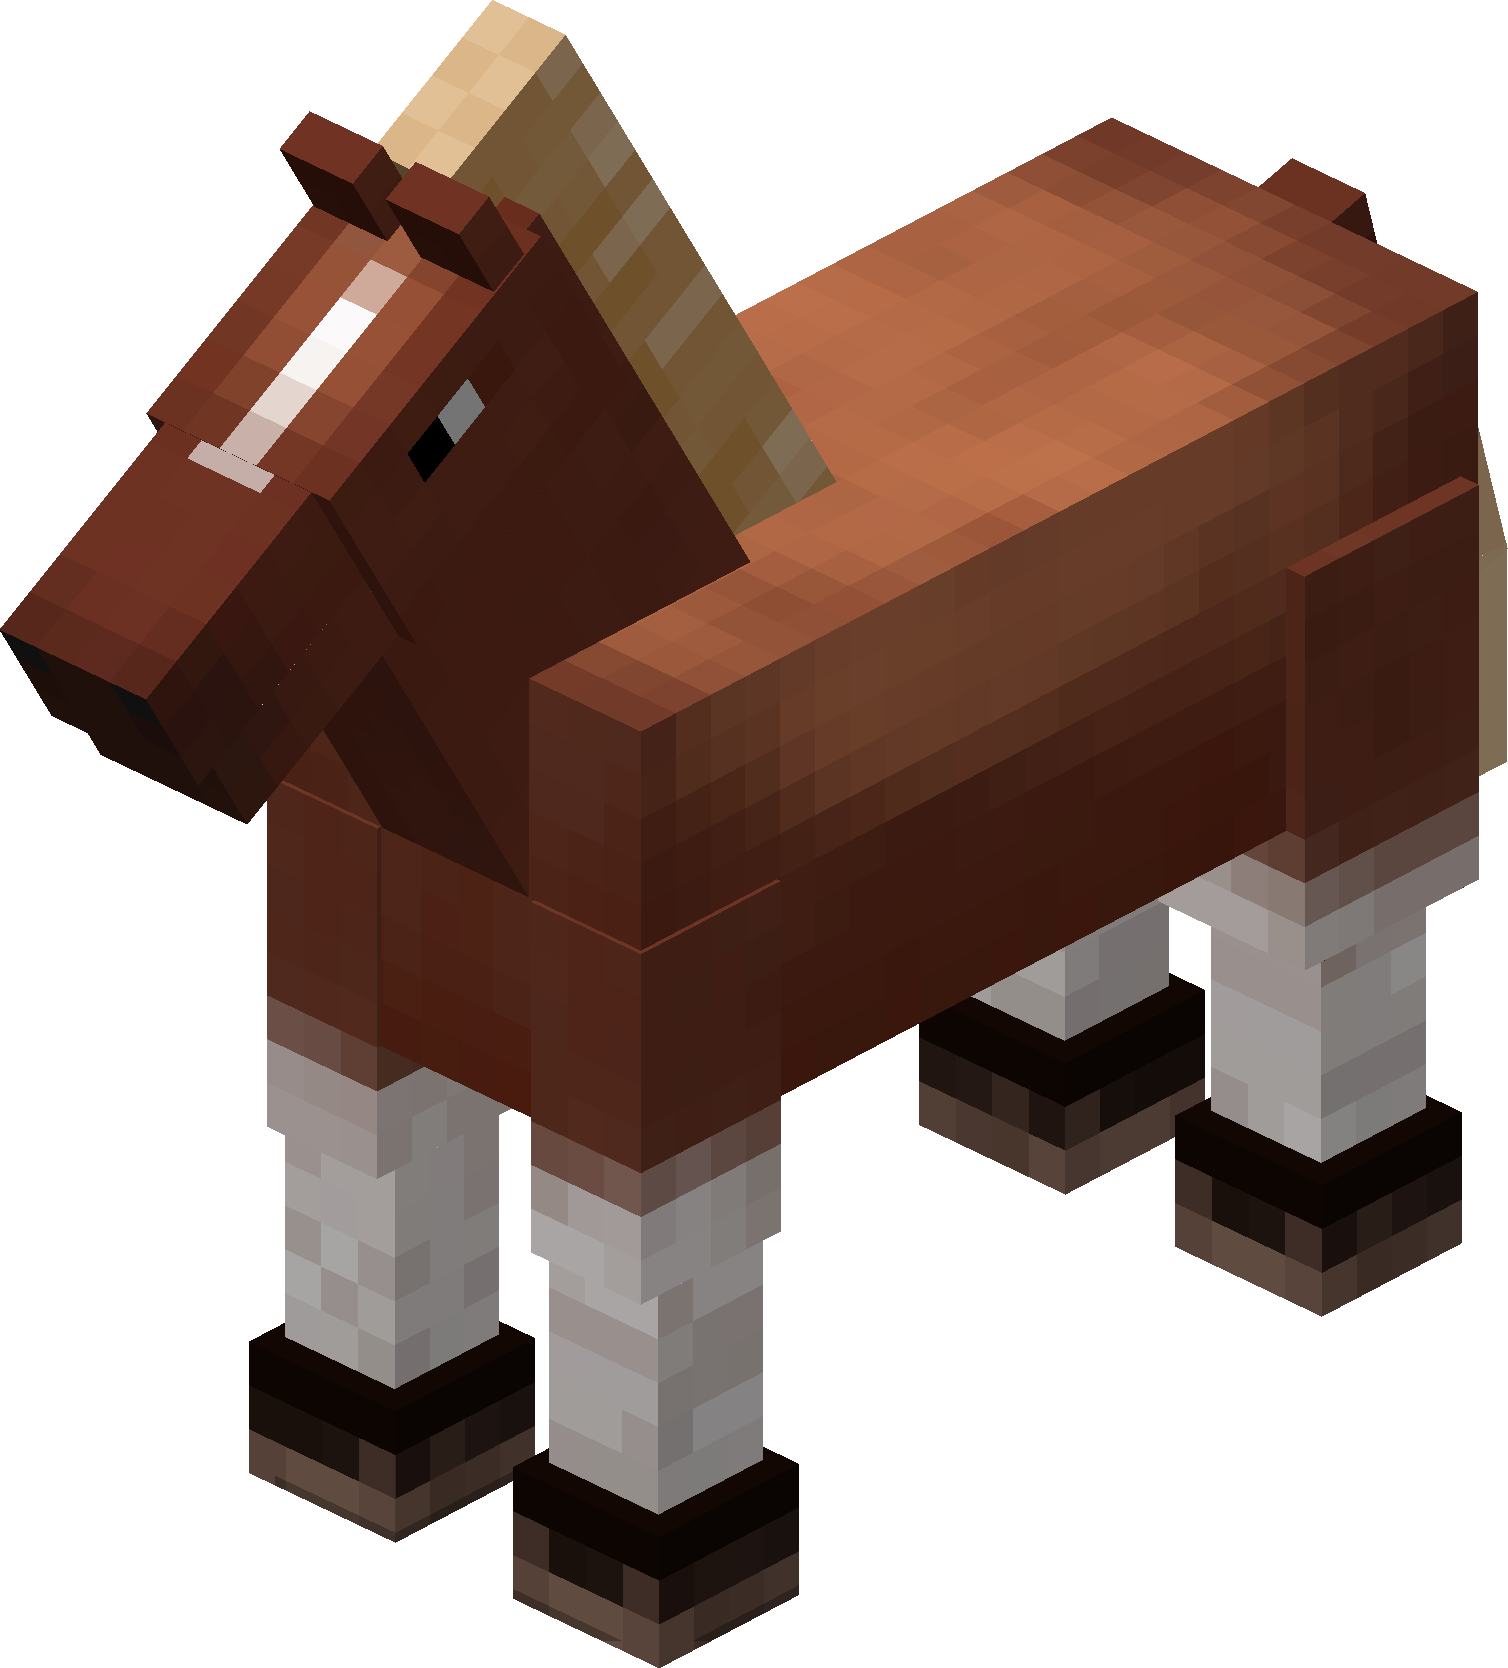 Horse | The Lord of the Rings Minecraft Mod Wiki | Fandom